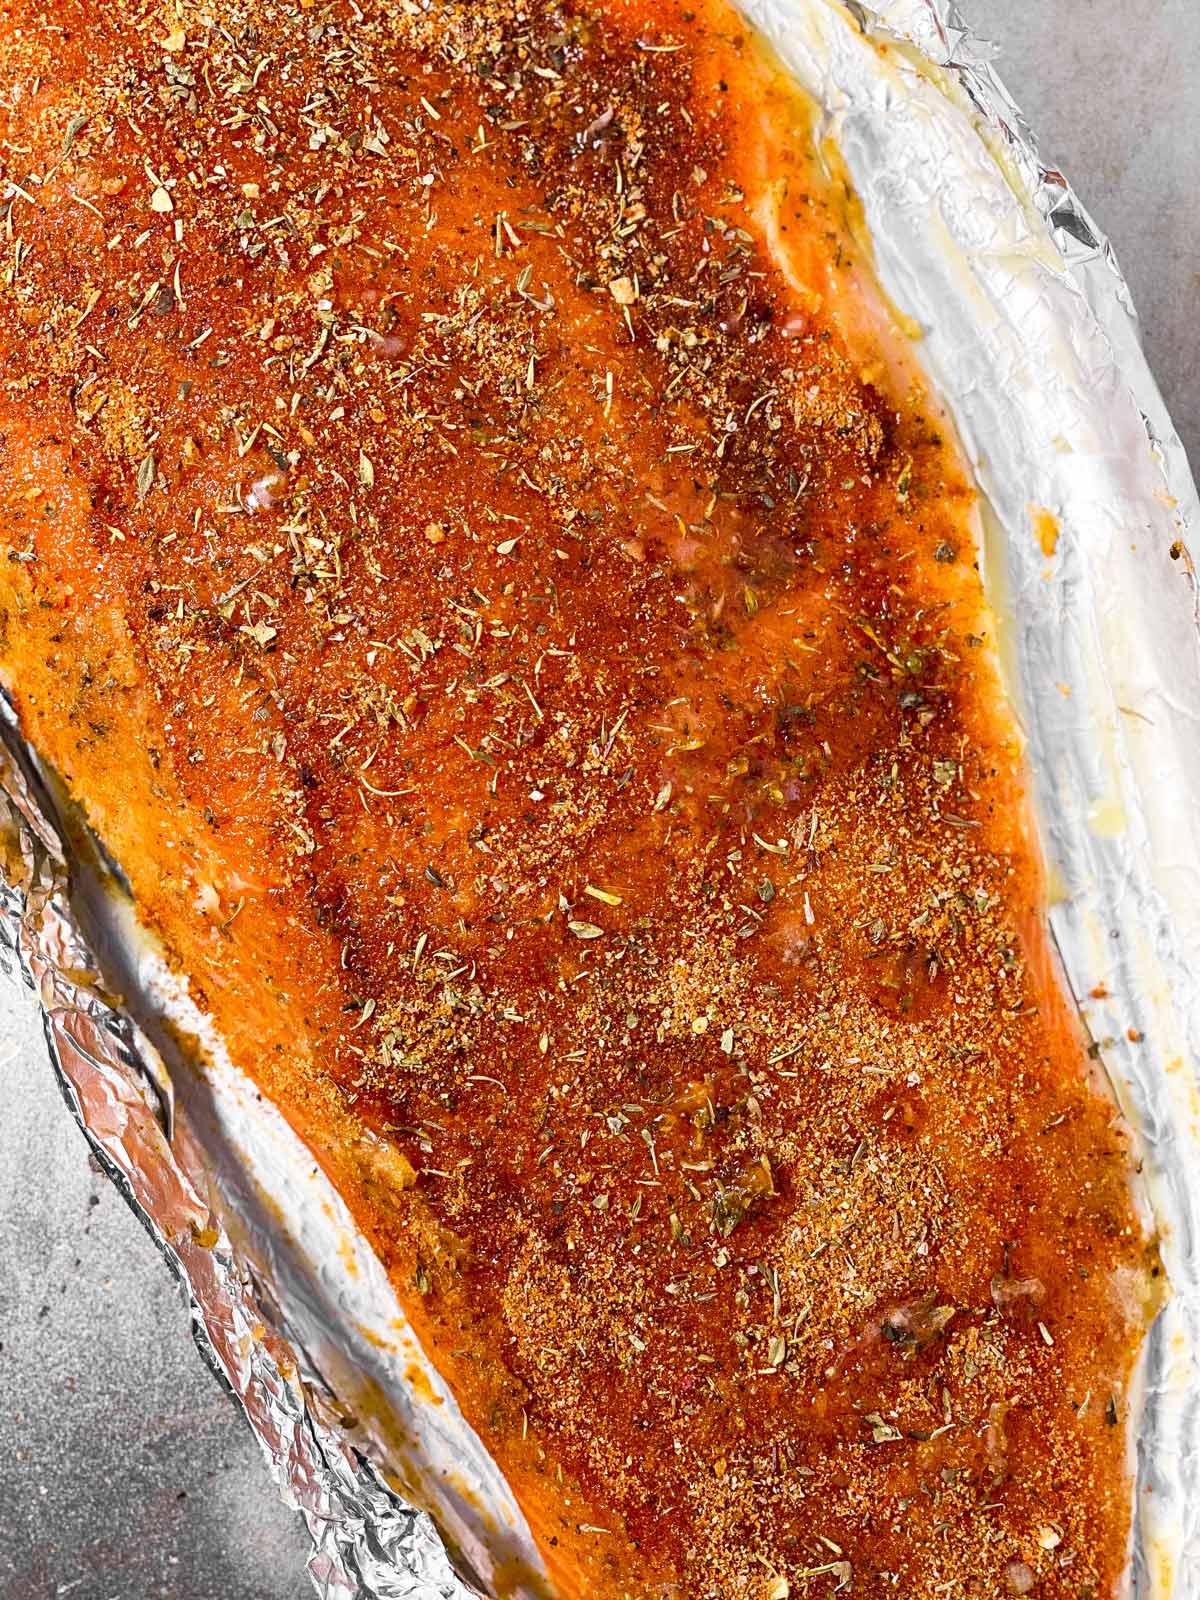 images of raw and baked salmon fillet on a baking sheet